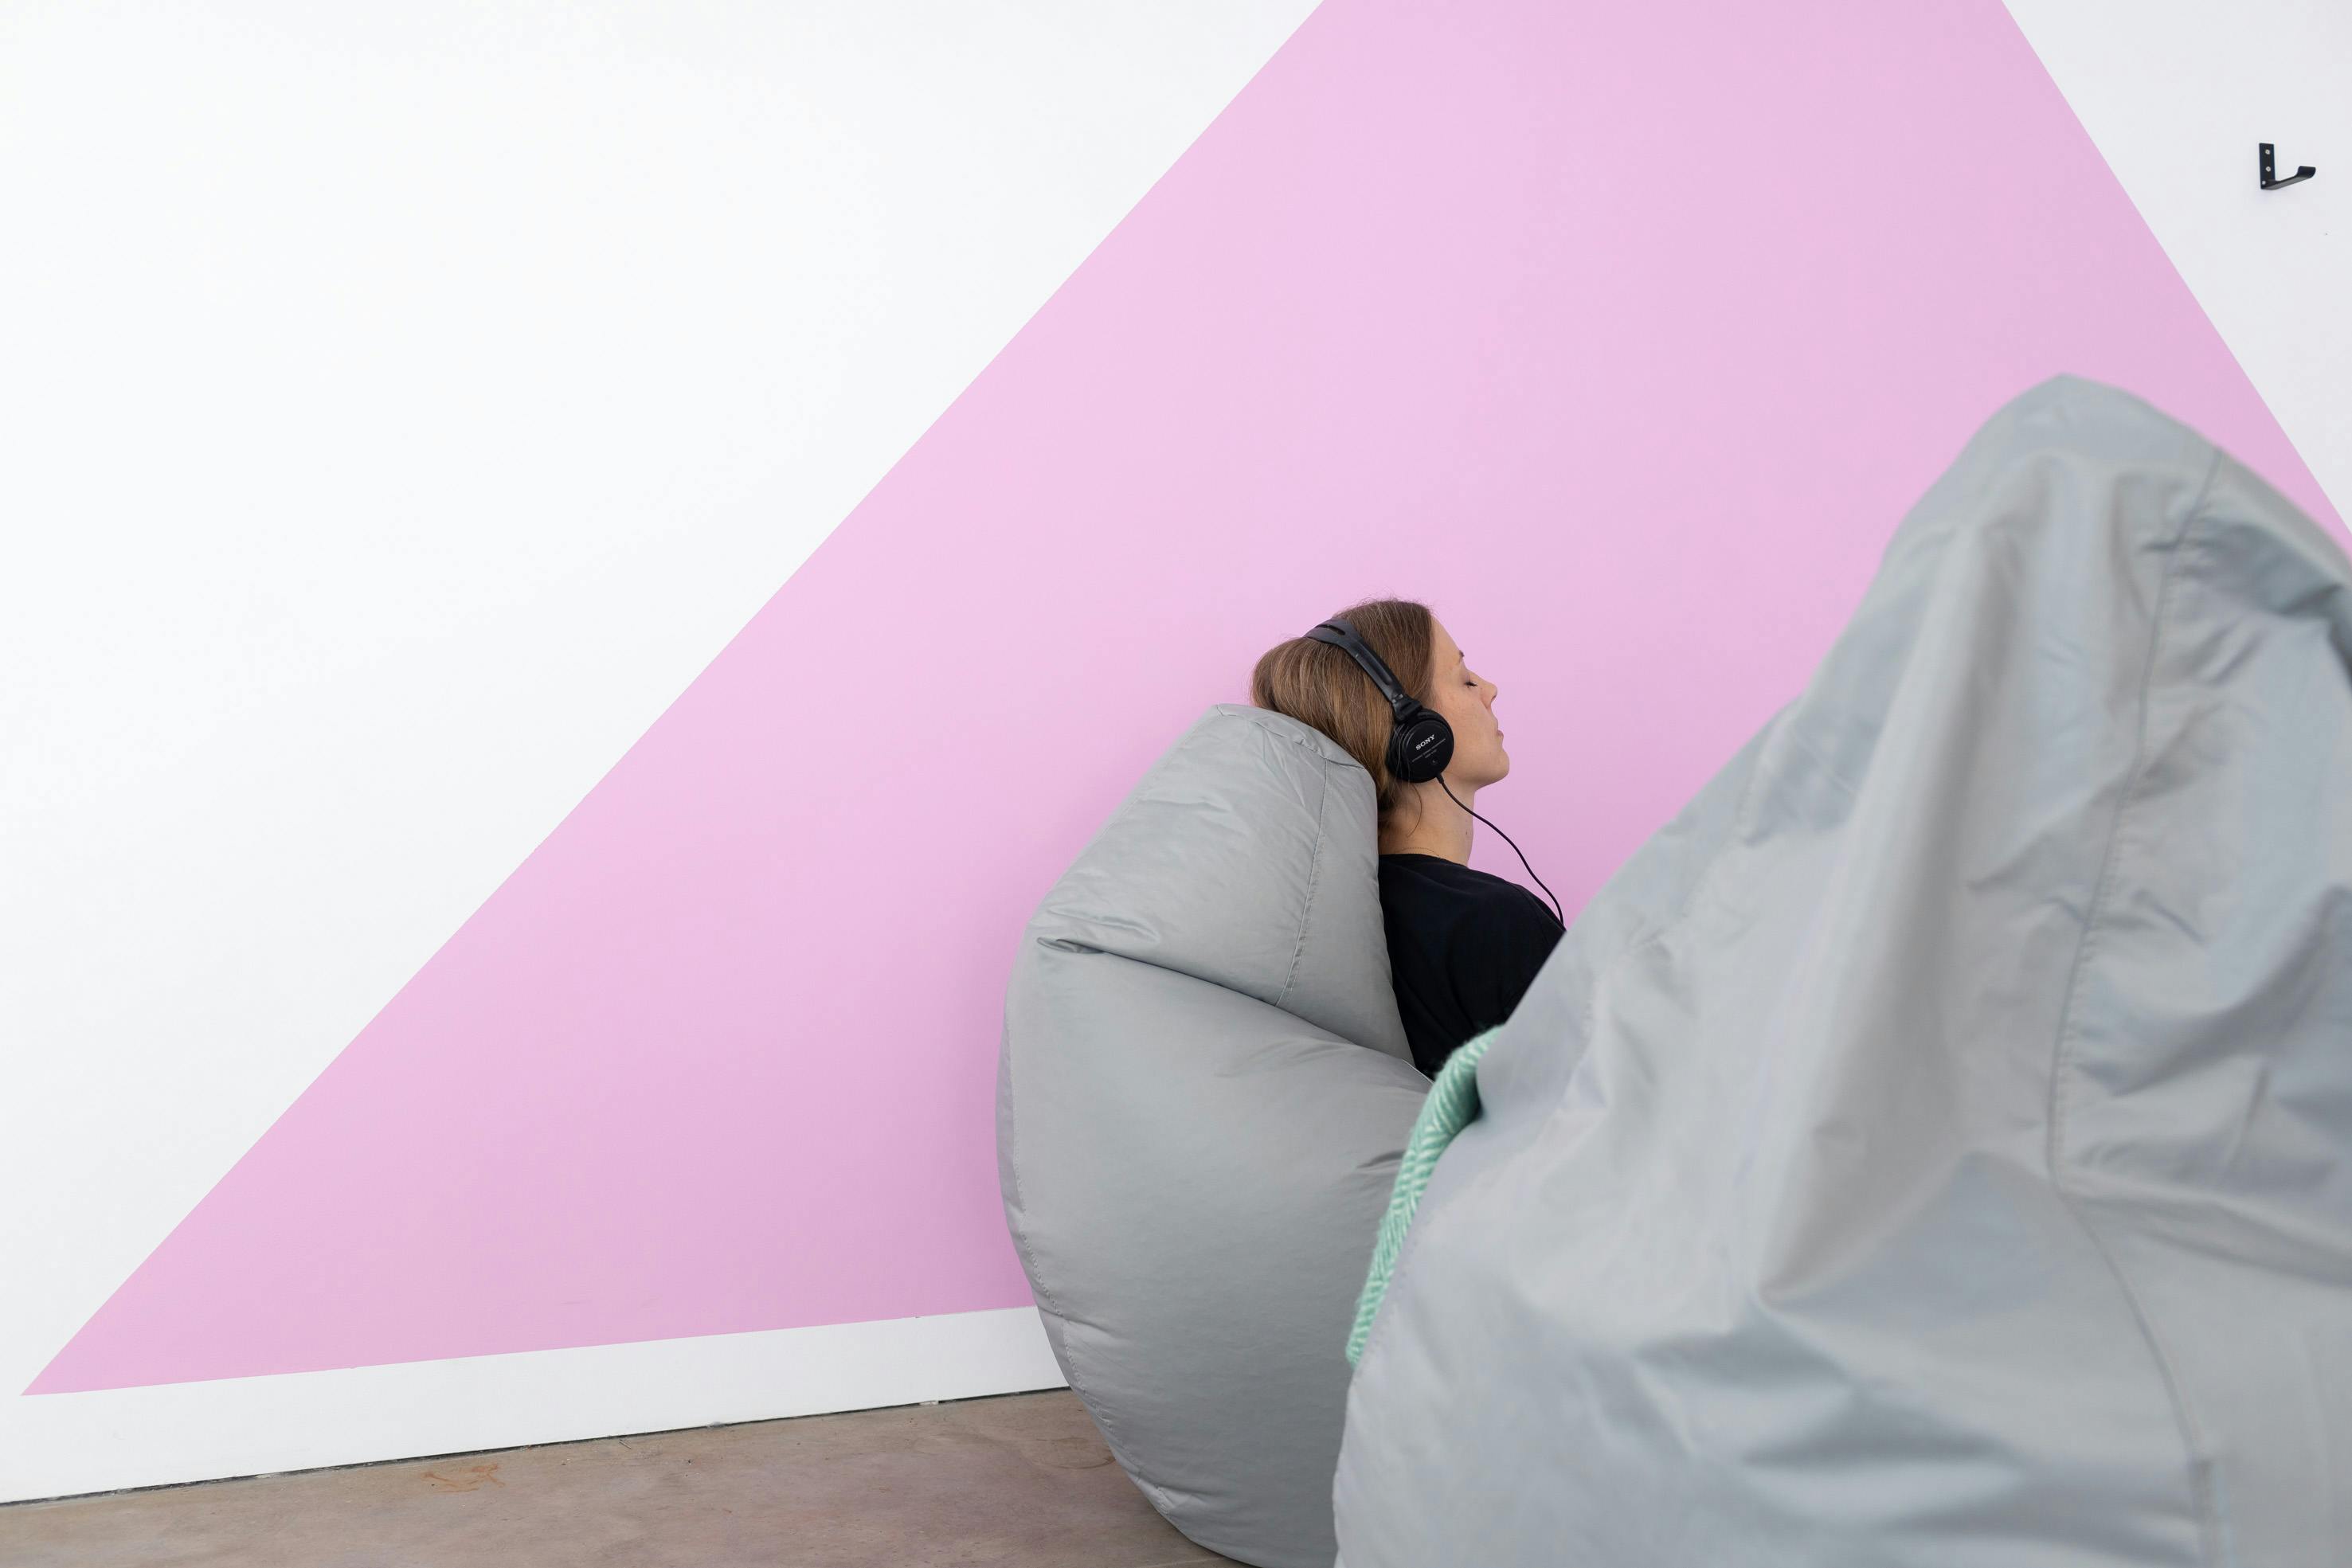 a photograph of a woman wearing headphones sitting on a large grey bean bag. The wall in the background is painted white with a large bright pink triangle.